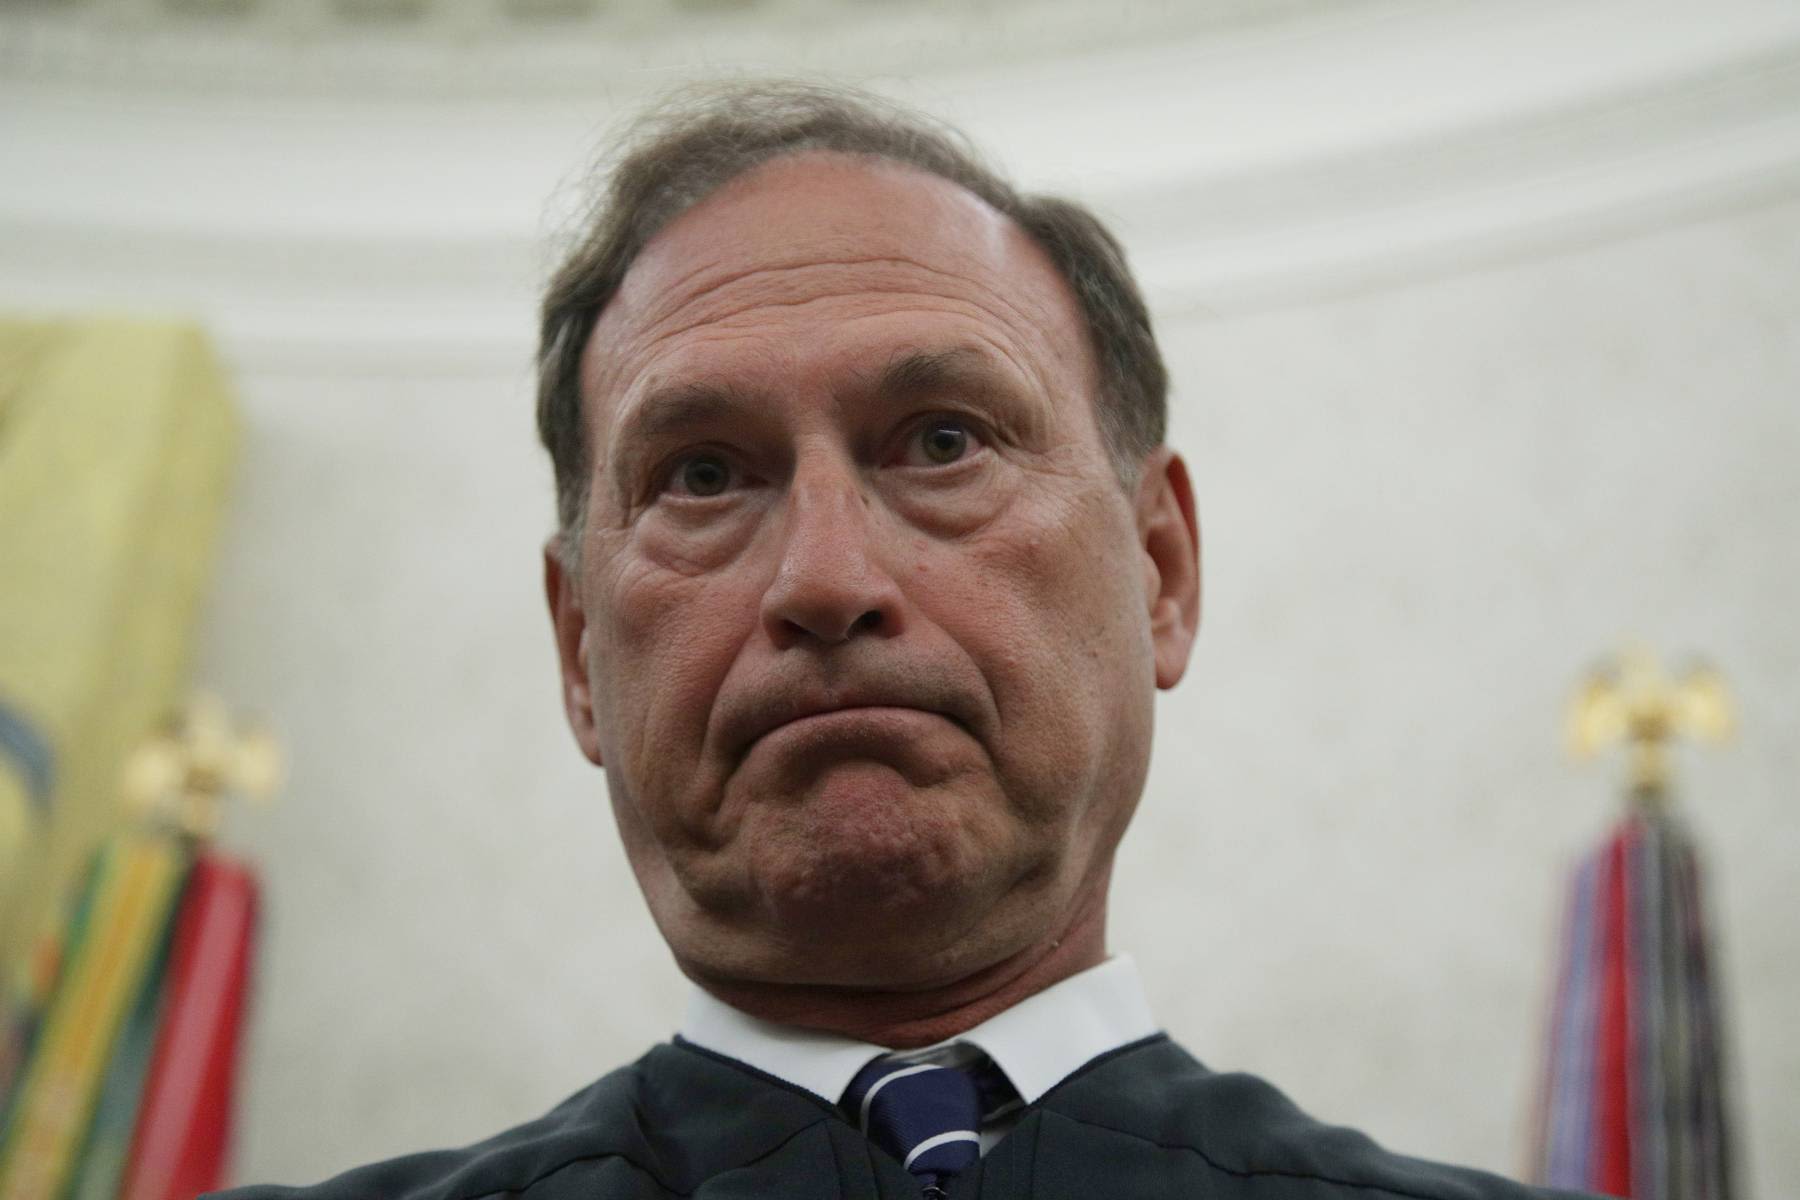 Justice Alito’s Upside-Down Flag Claim Dismantled by Police, Neighbors: Report